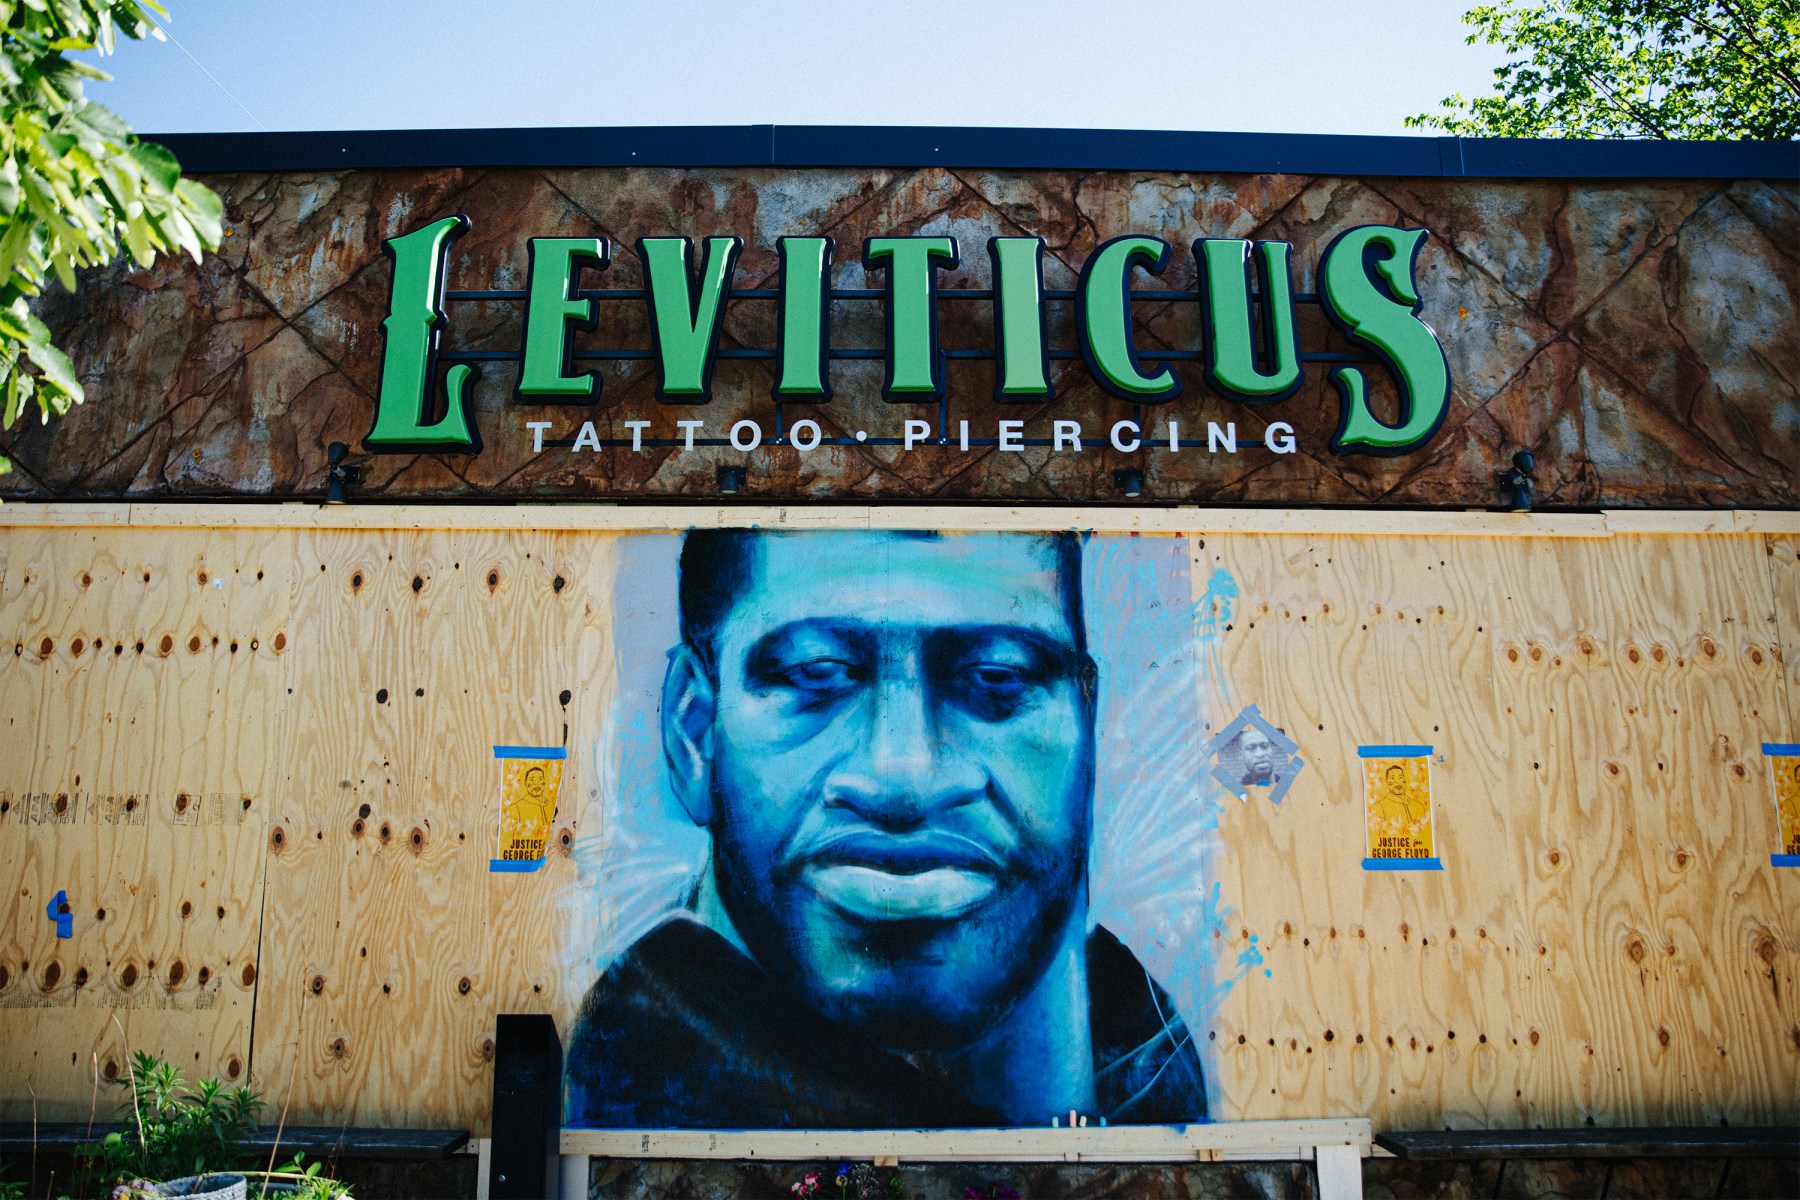 Multiple tattoo artists in the city have used their skills to honor George Floyd and others.